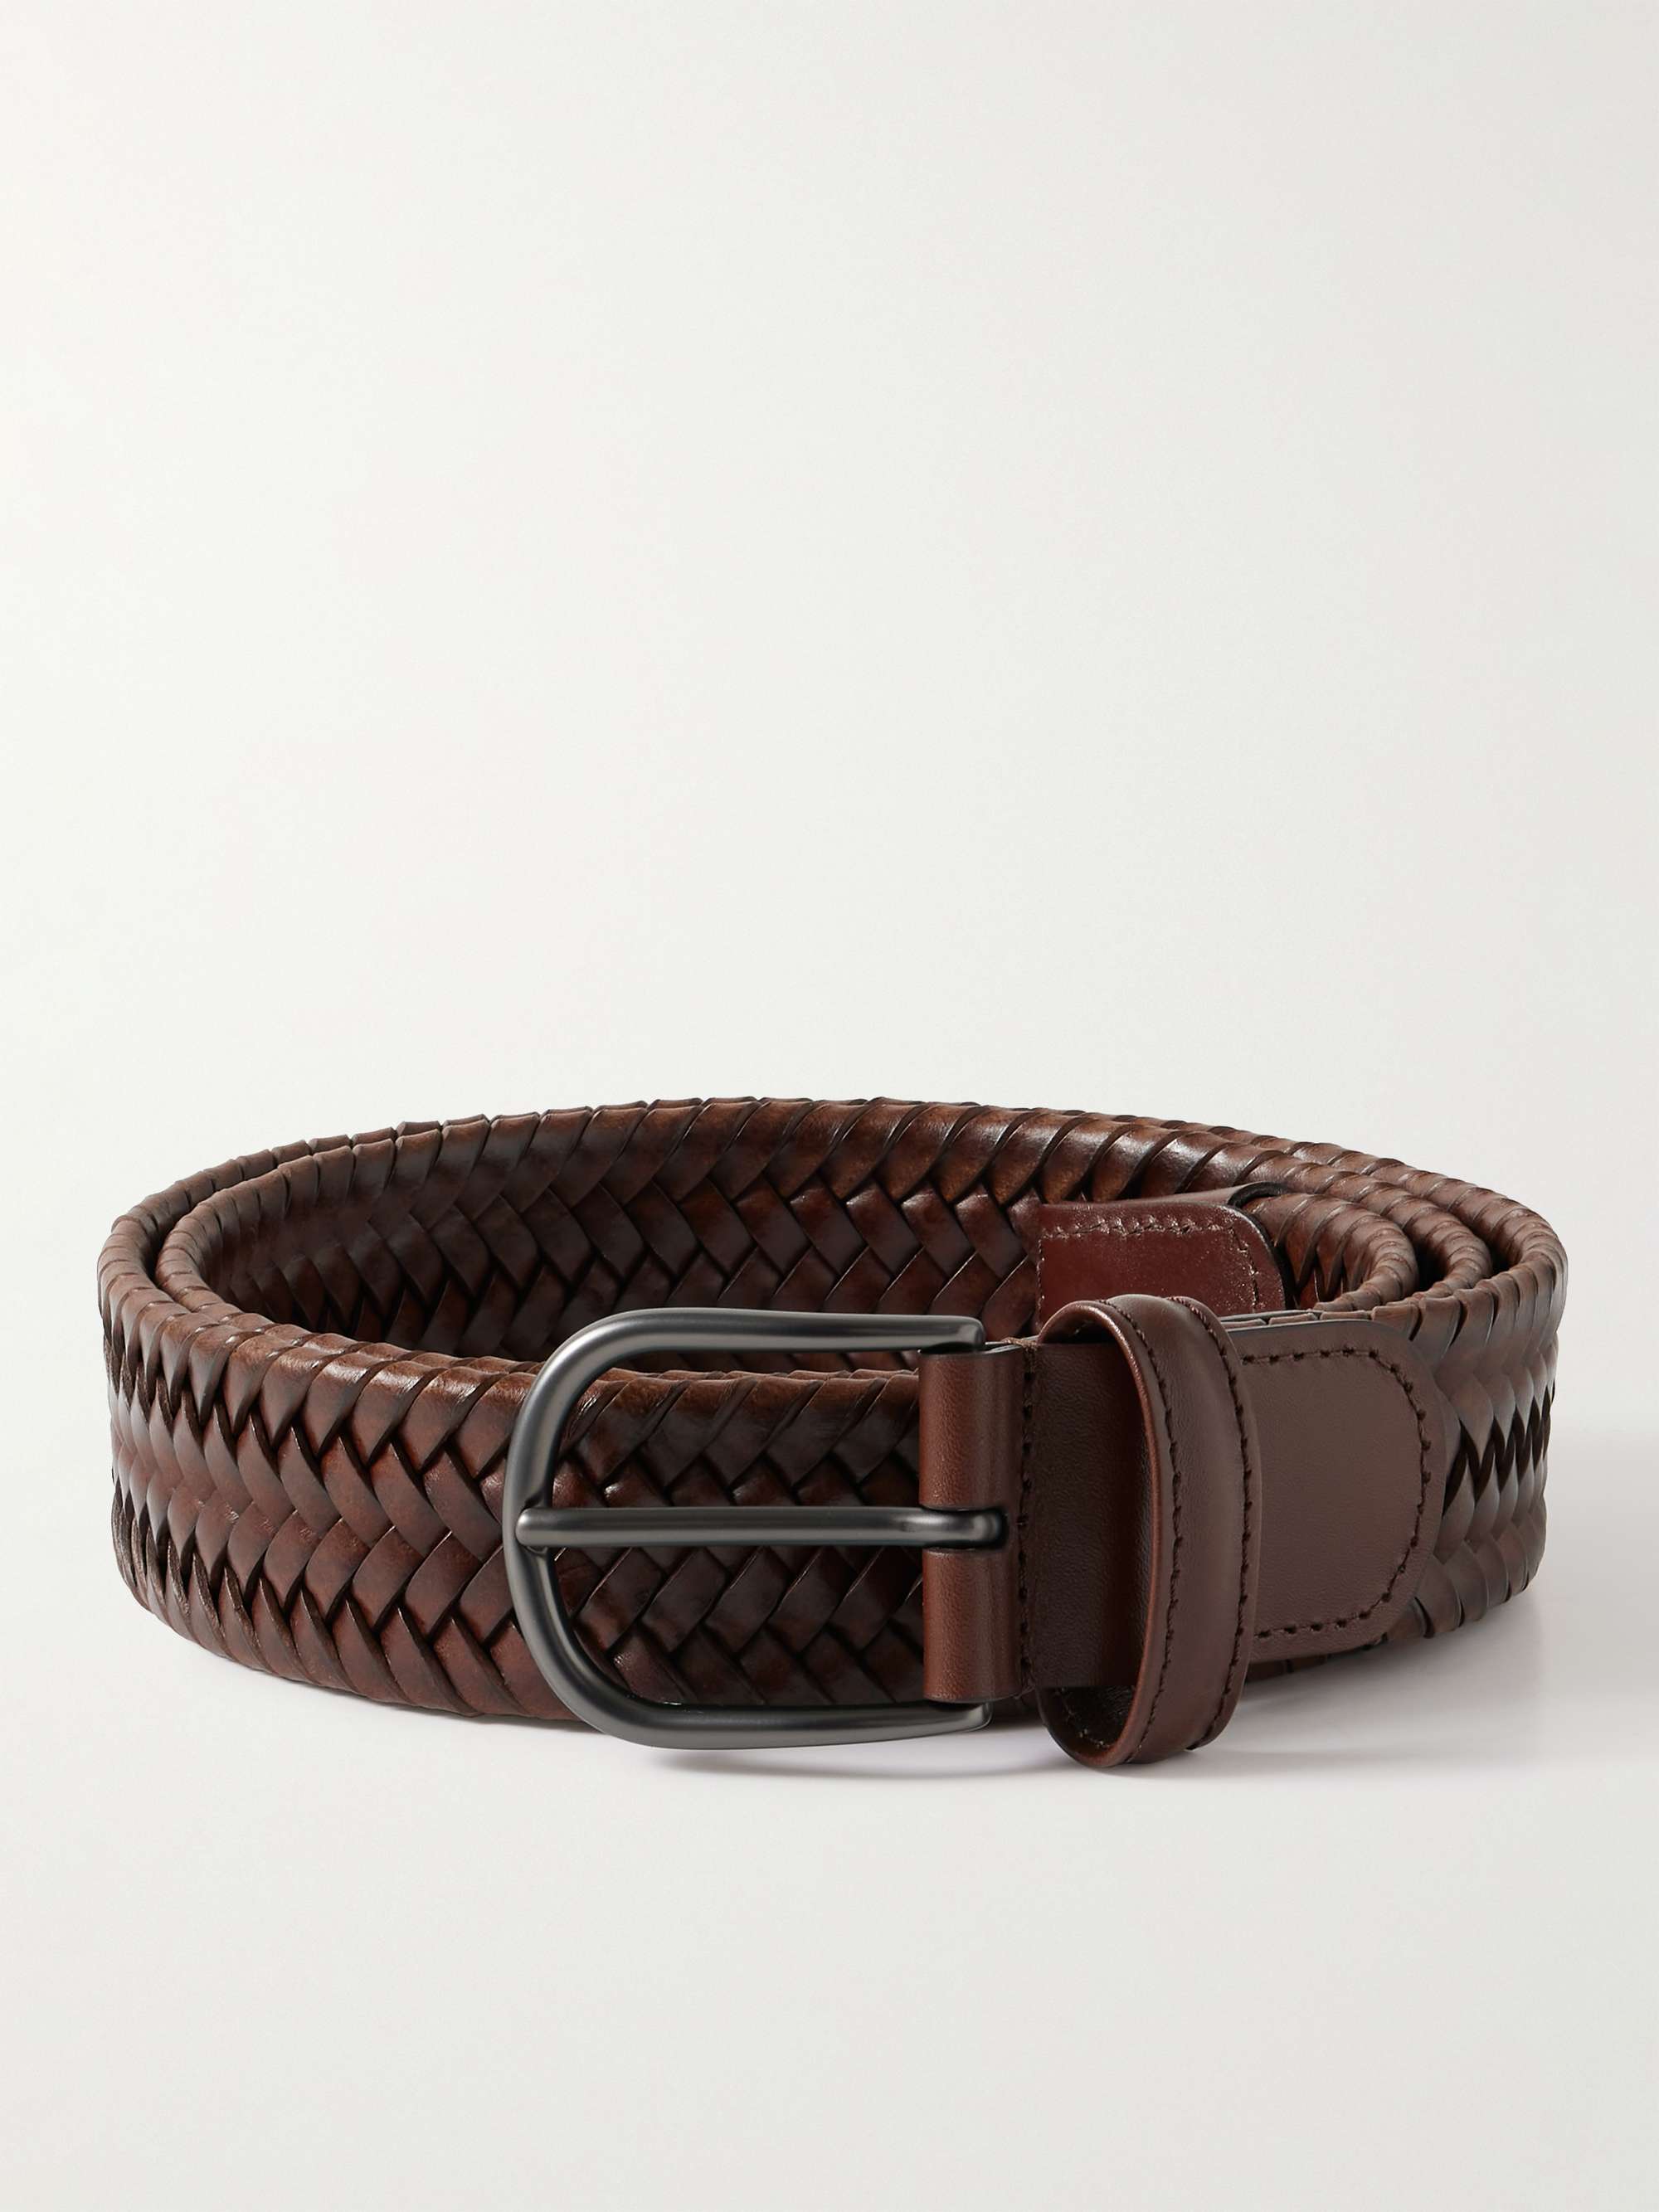 ANDERSON'S 3.5cm Woven Leather Belt for Men